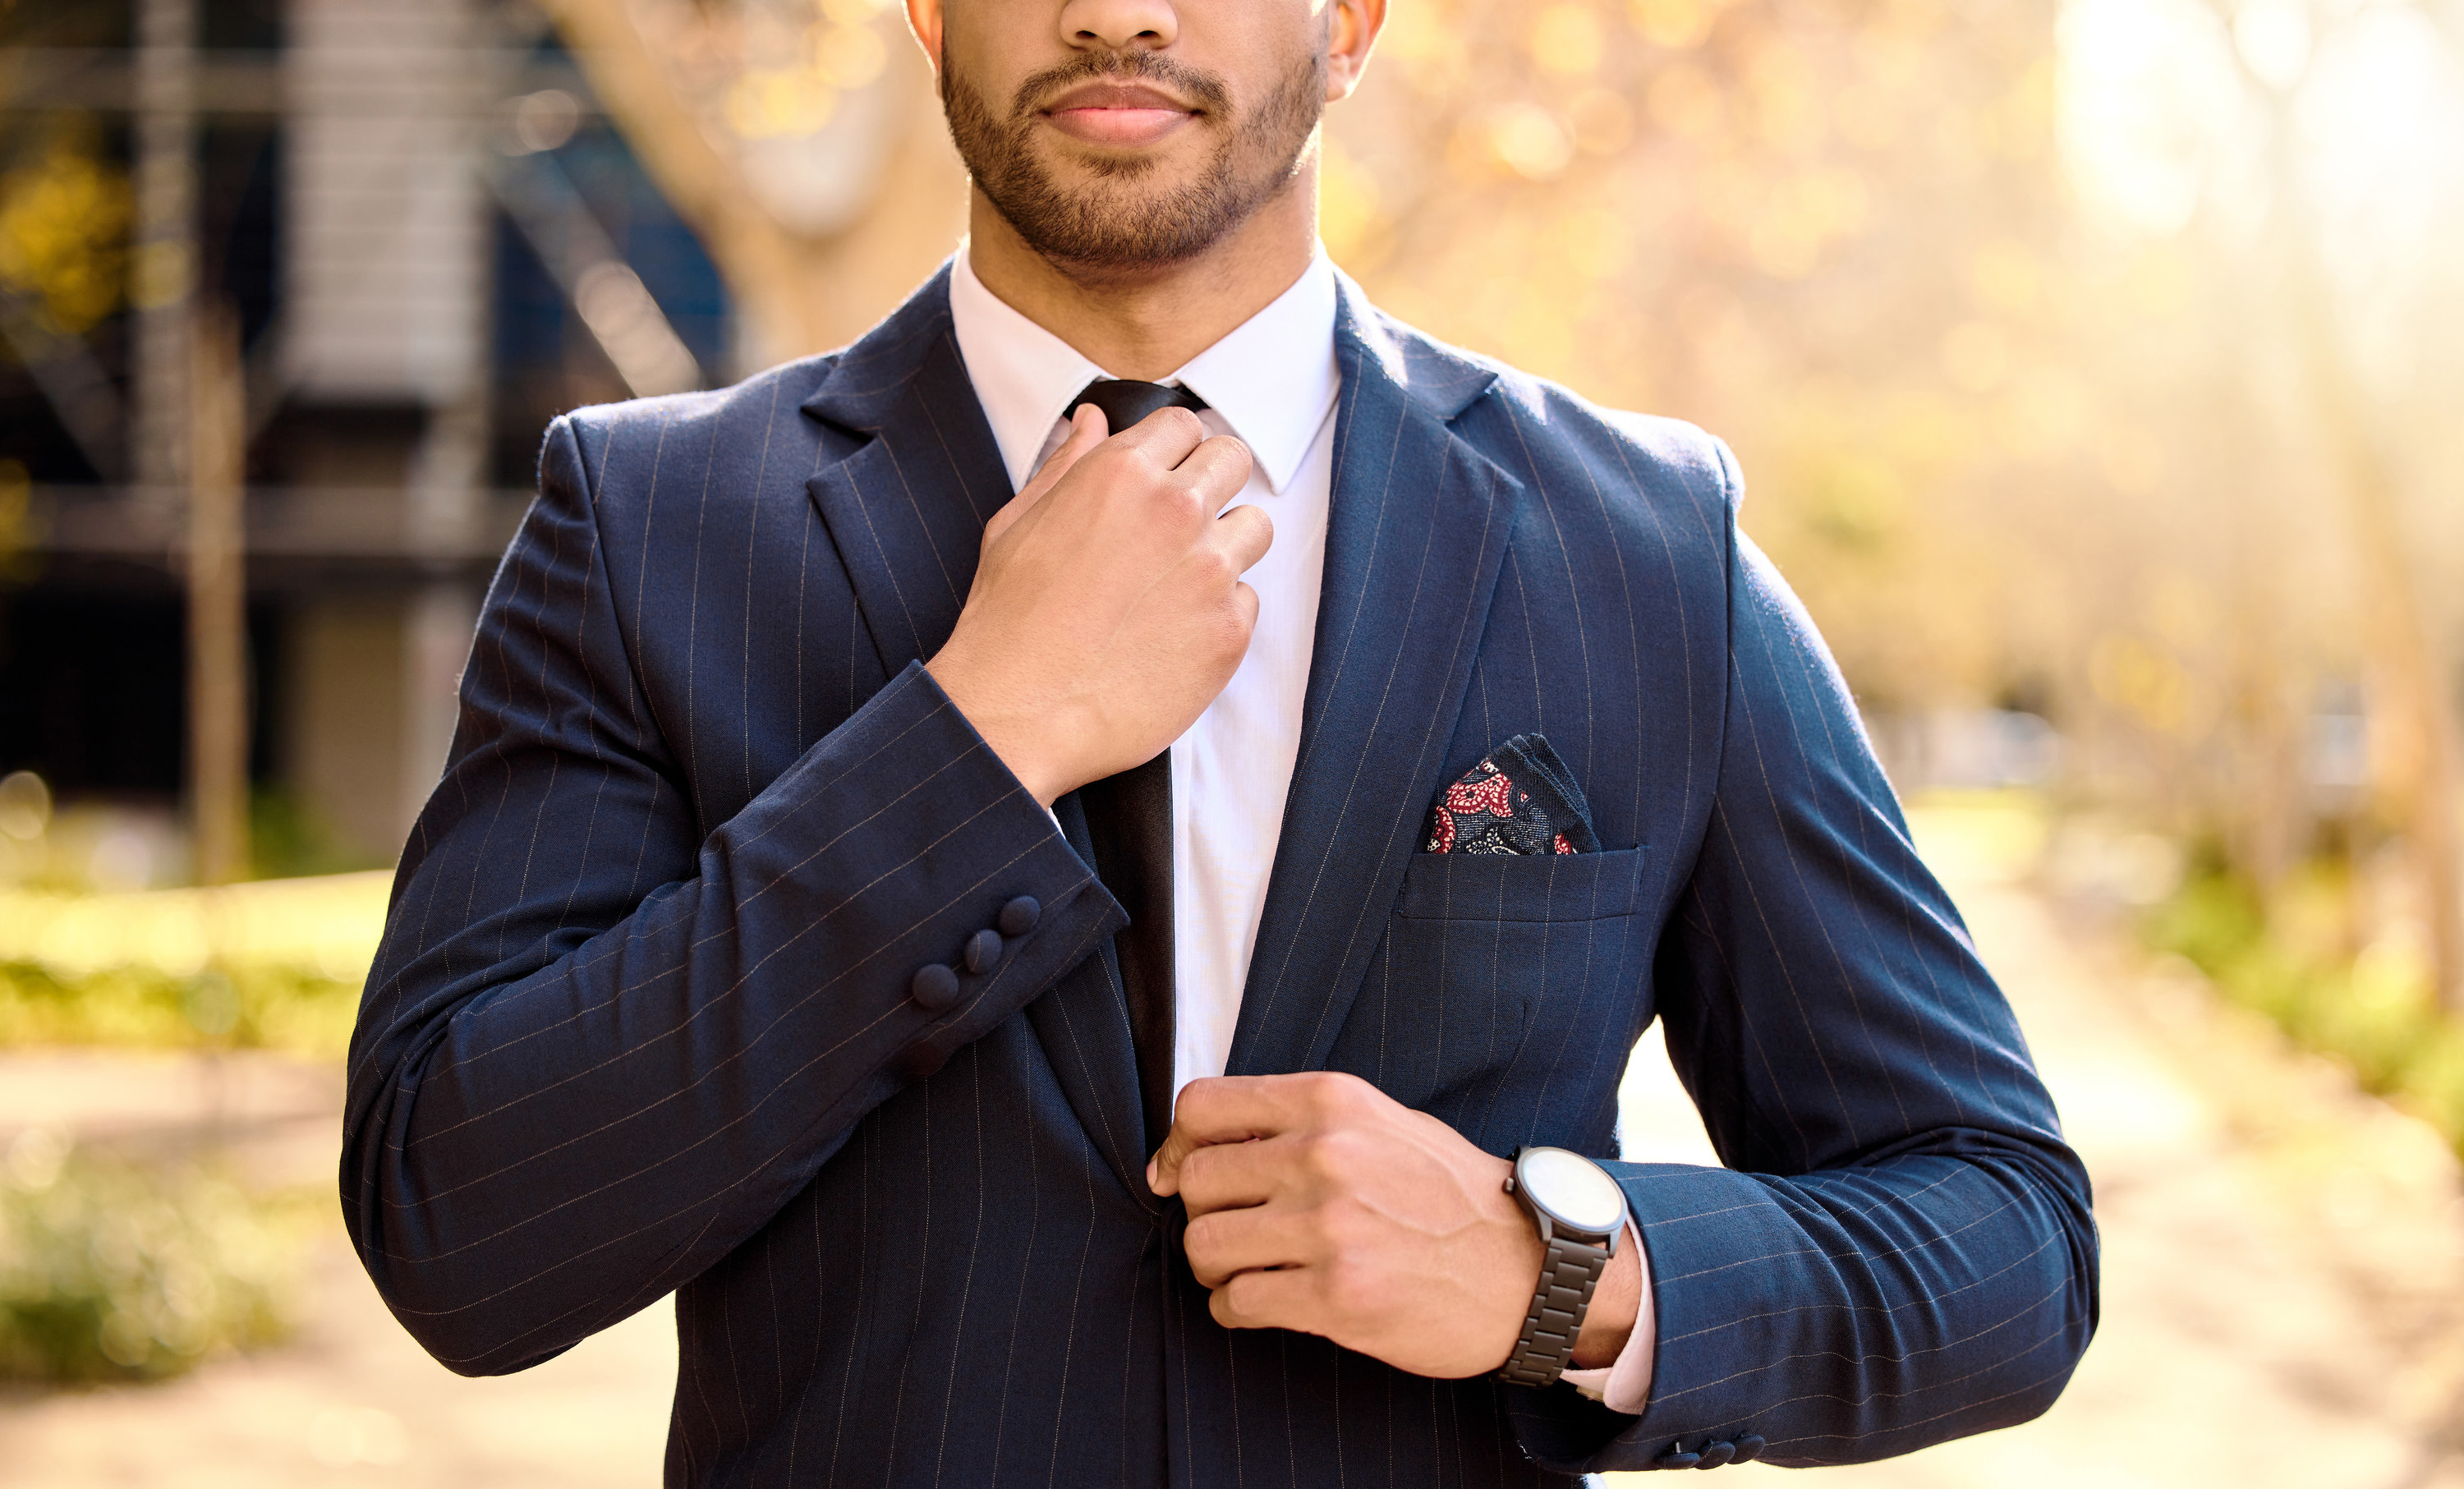 A man dressed in a suit fixes his tie